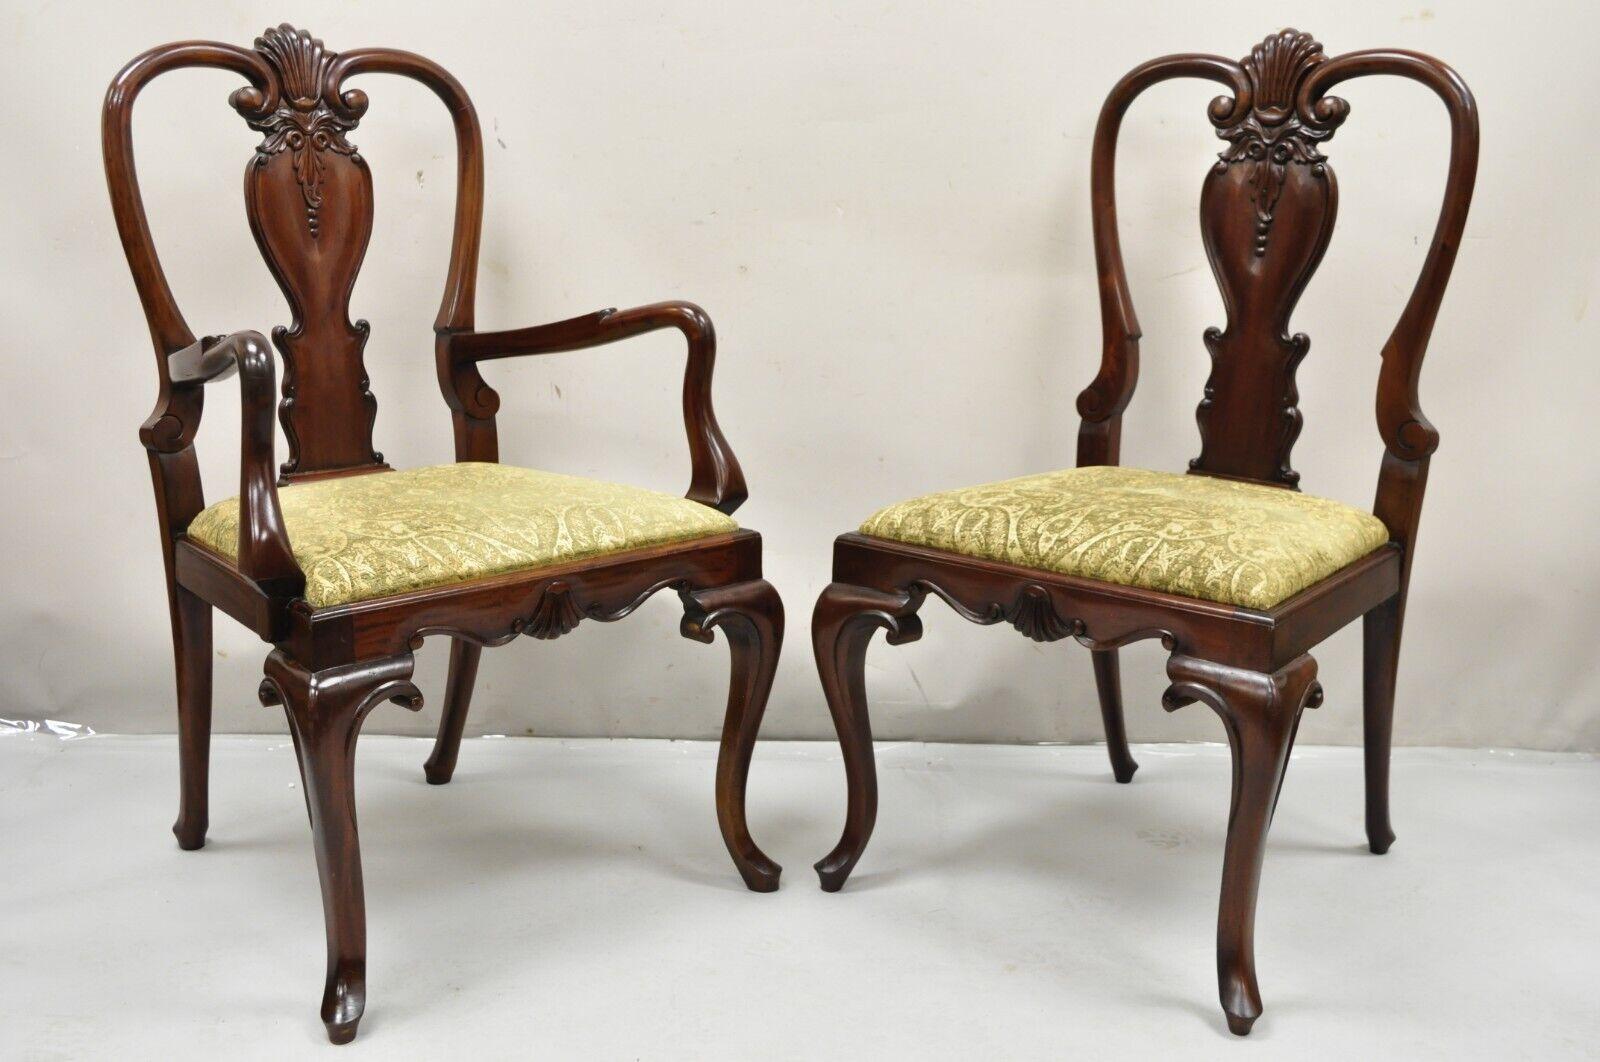 Queen Anne Style Solid Mahogany Carved Fan T-Back Dining Chairs- Set of 12. Item features solid mahogany wood frames, shell carved fan backs, green upholstered seats, very rare set of 12. Circa Late 20th Century.
Measurements: 
2) Armchairs: 41.5